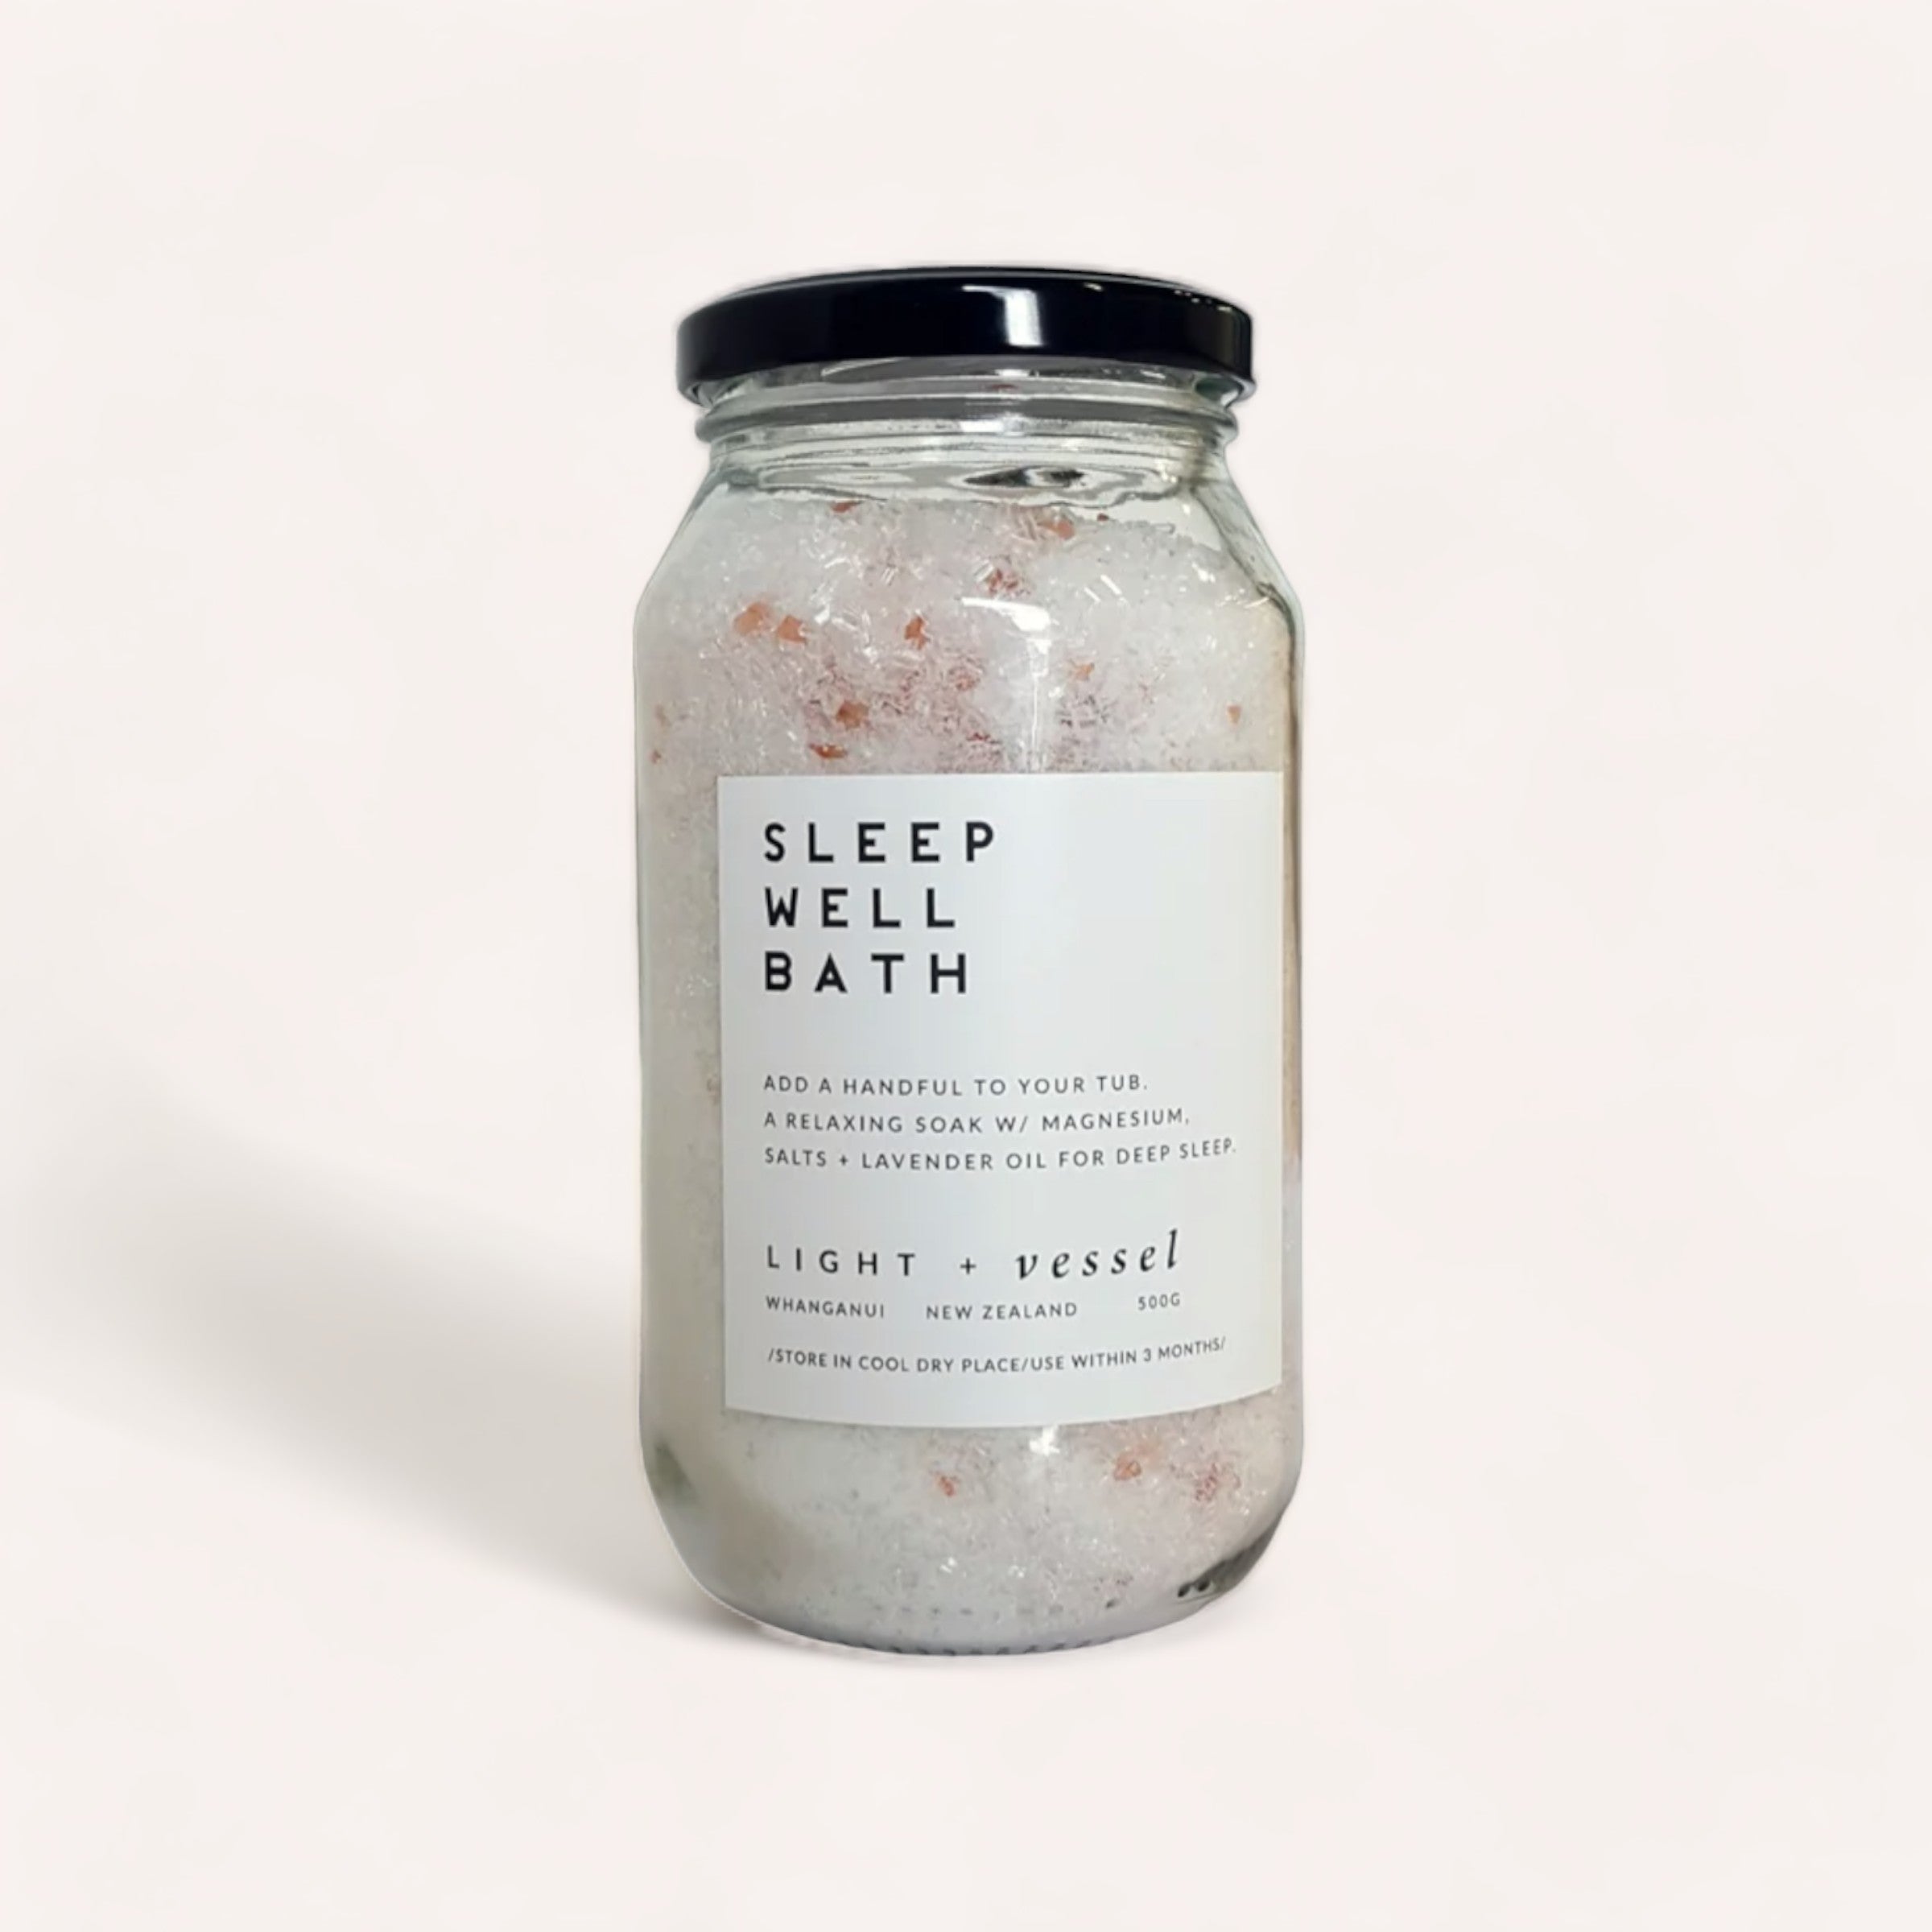 A jar of "Sleep Well Bath" bath salts with essential oils of lavender and magnesium pink mountain salts, designed for relaxation and sleep enhancement, produced by Light + Vessel from Whanganui, New Zealand.